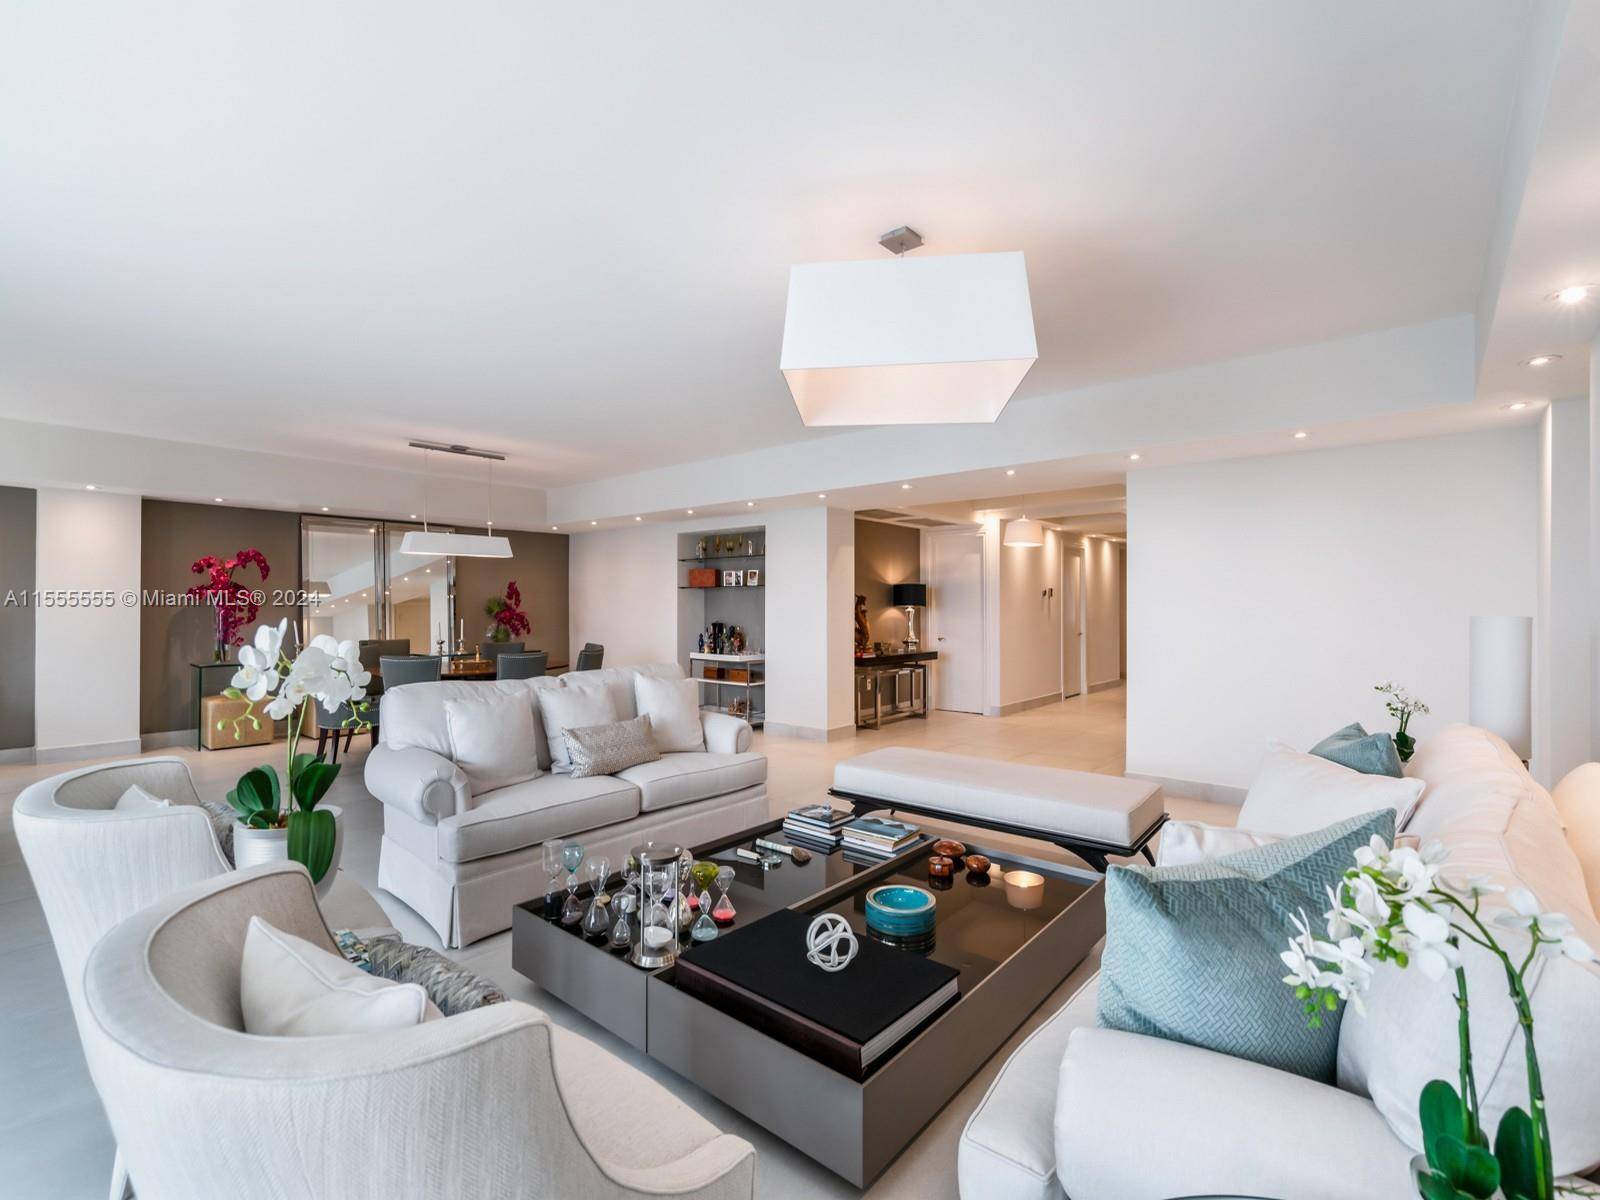 Masterful and modern luxury are uniquely embodied in this 3 bedroom, plus office and 4.